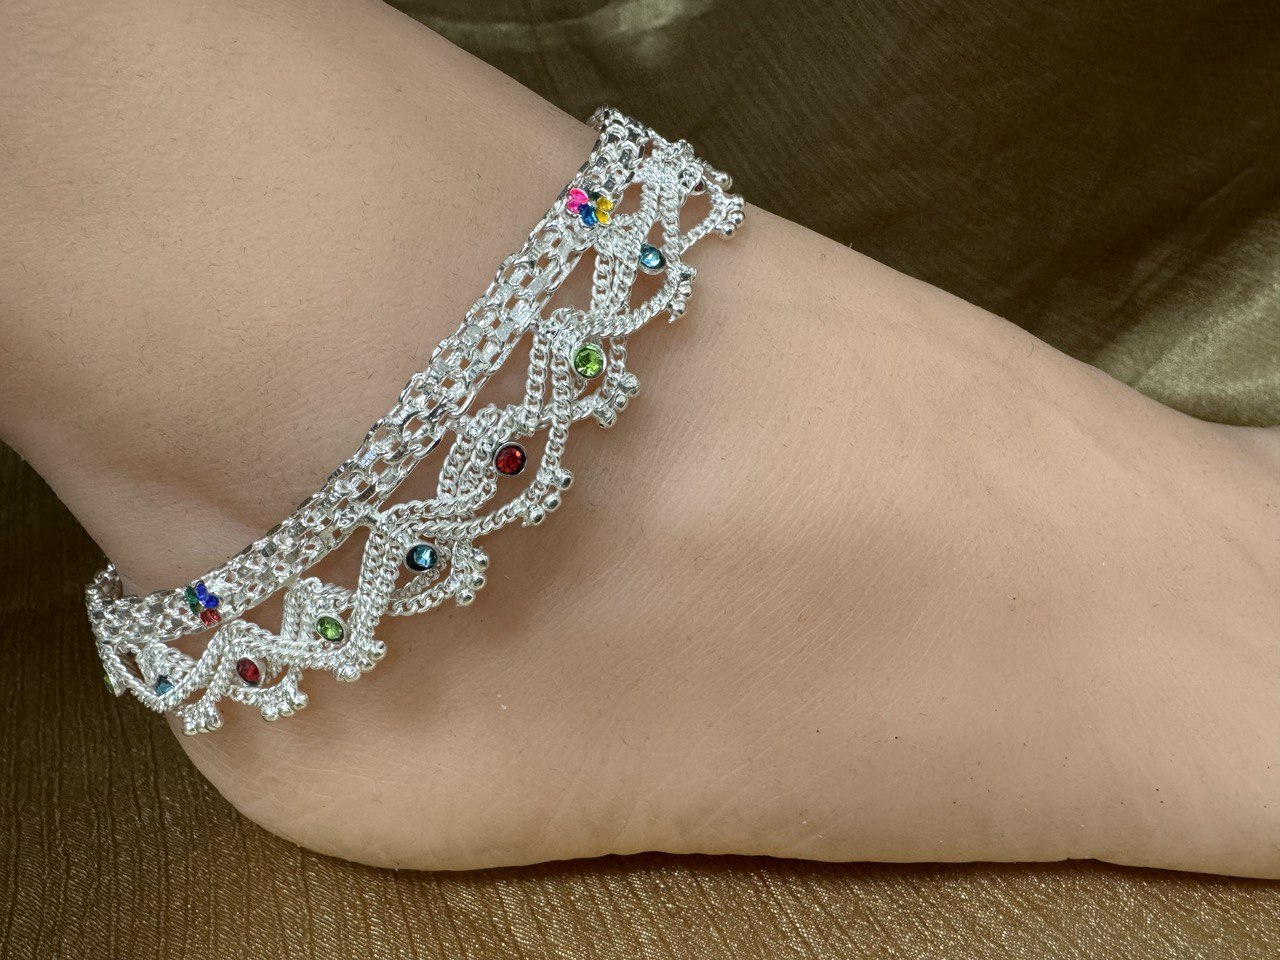 GA-12 Anklets Payal Pair for Legs Indian Jewelry